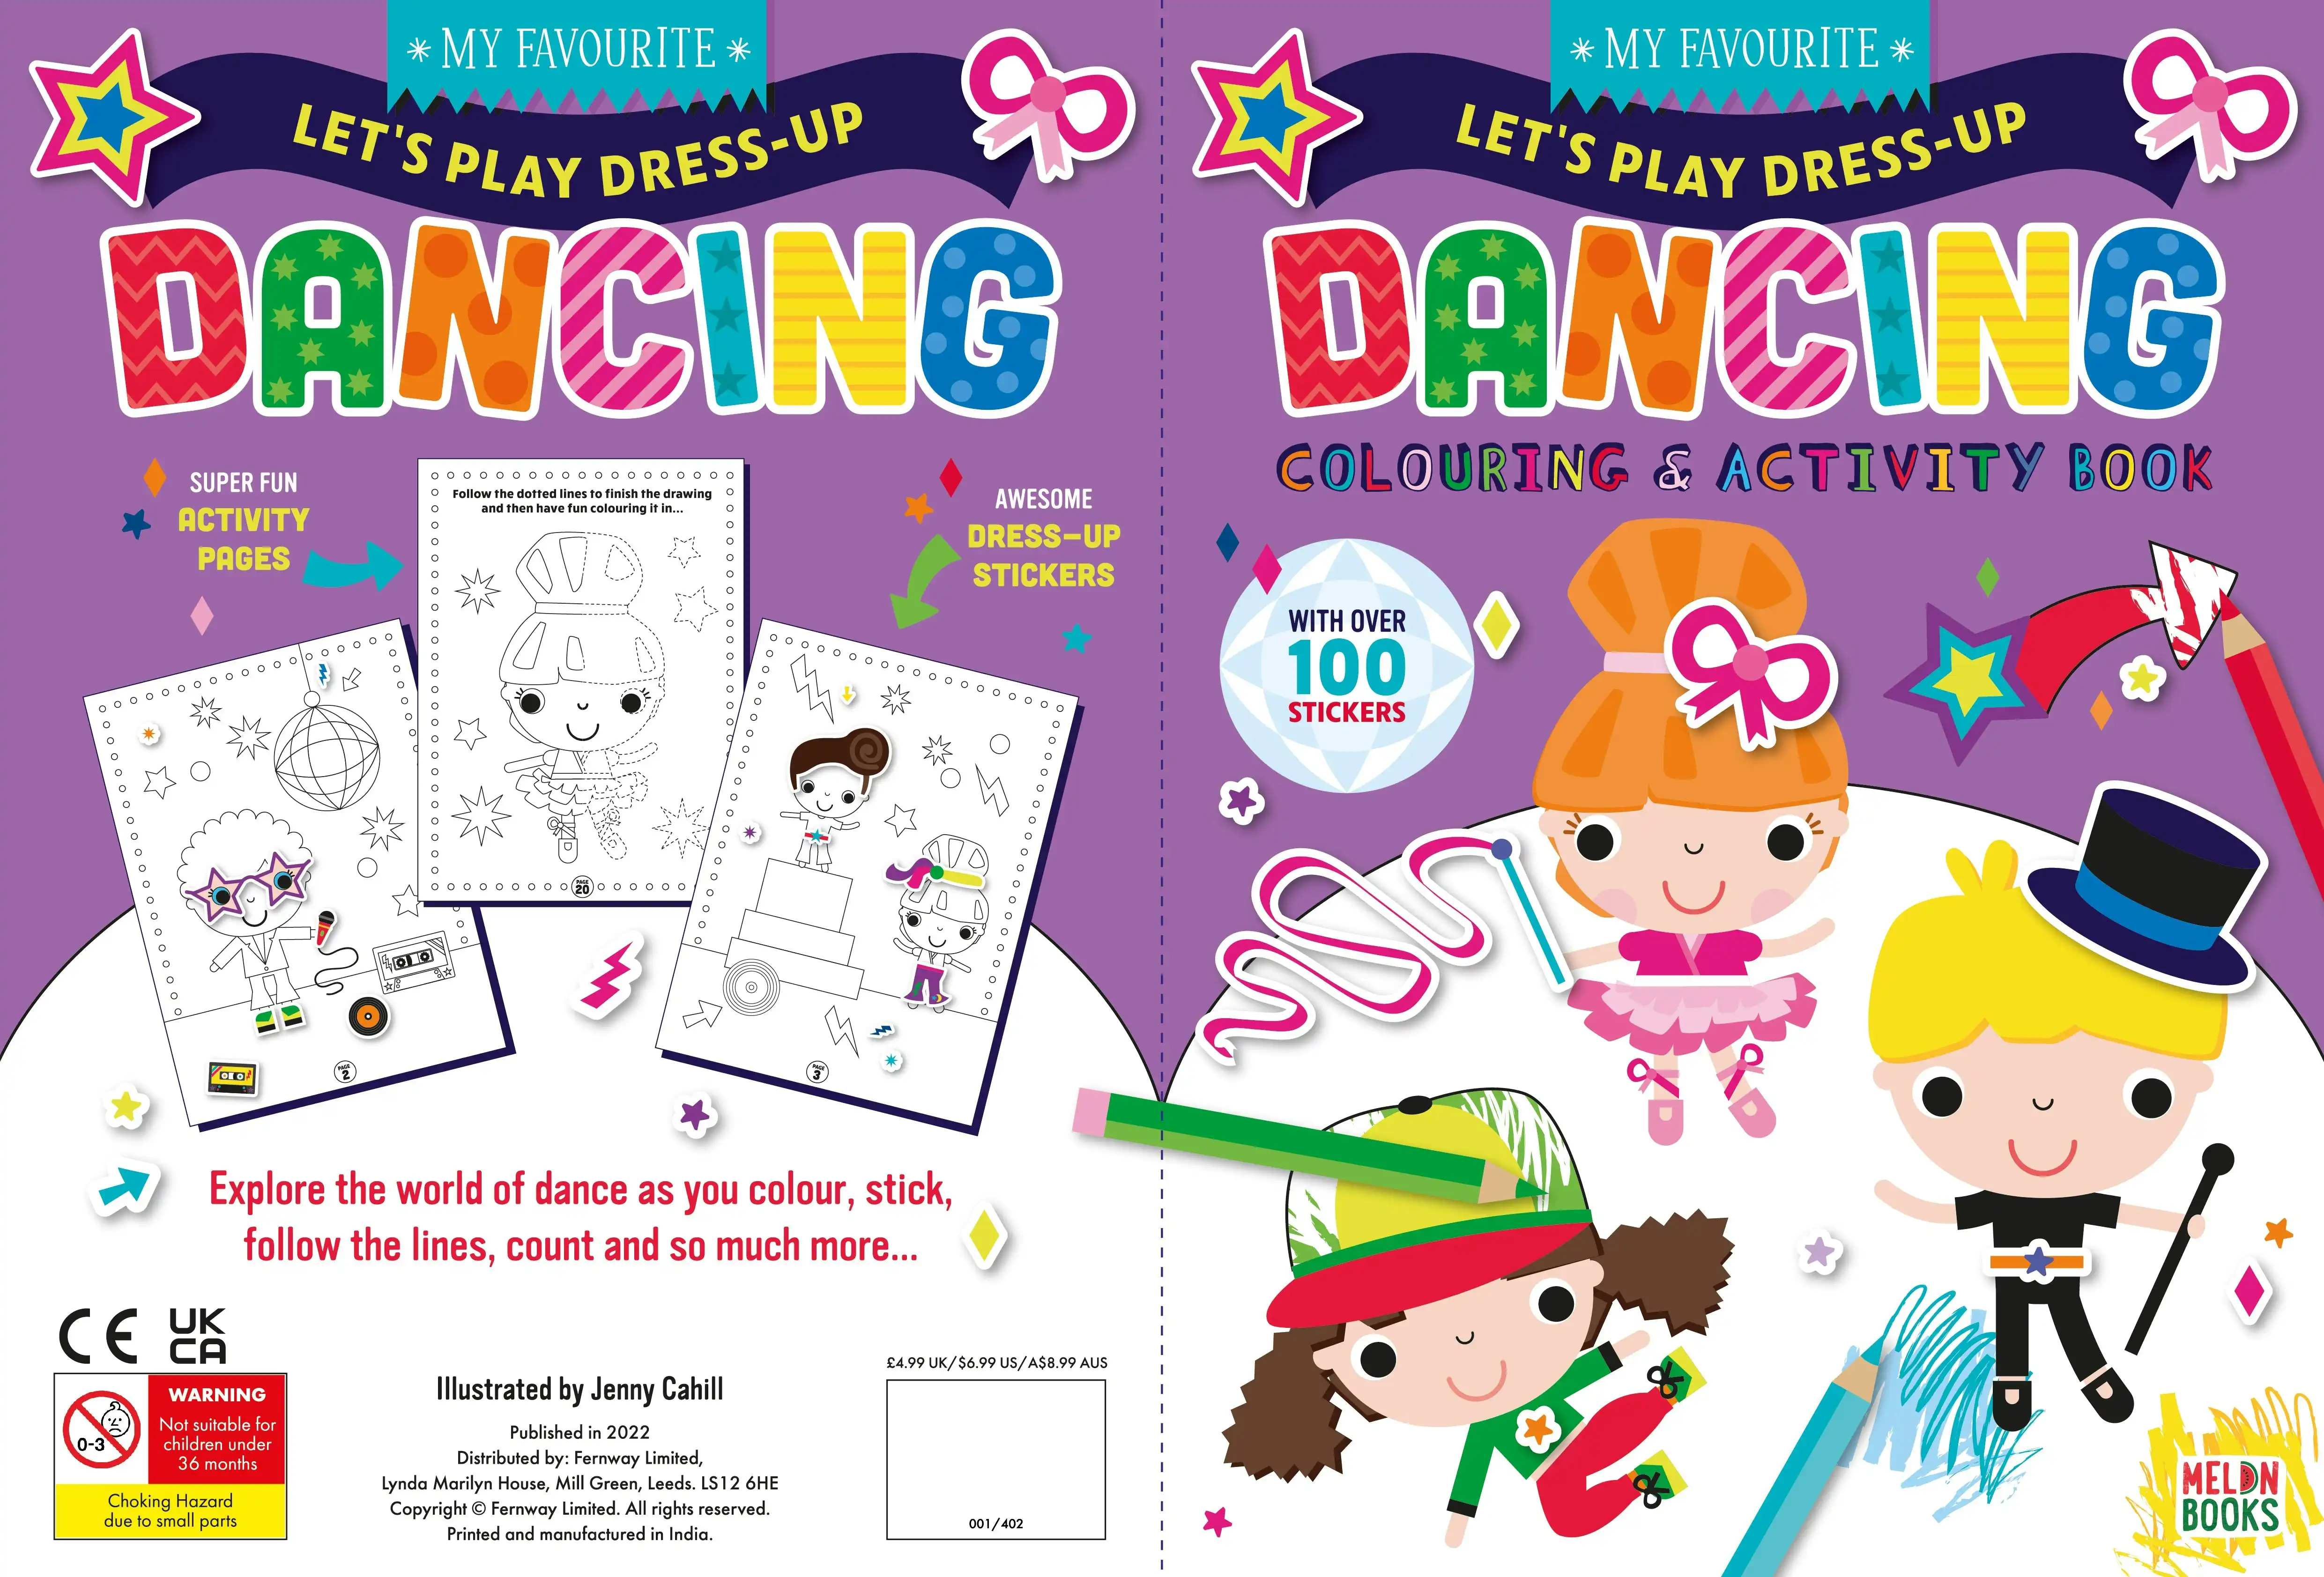 Lets Play Dress Up Colouring & Activity Book, Dancing